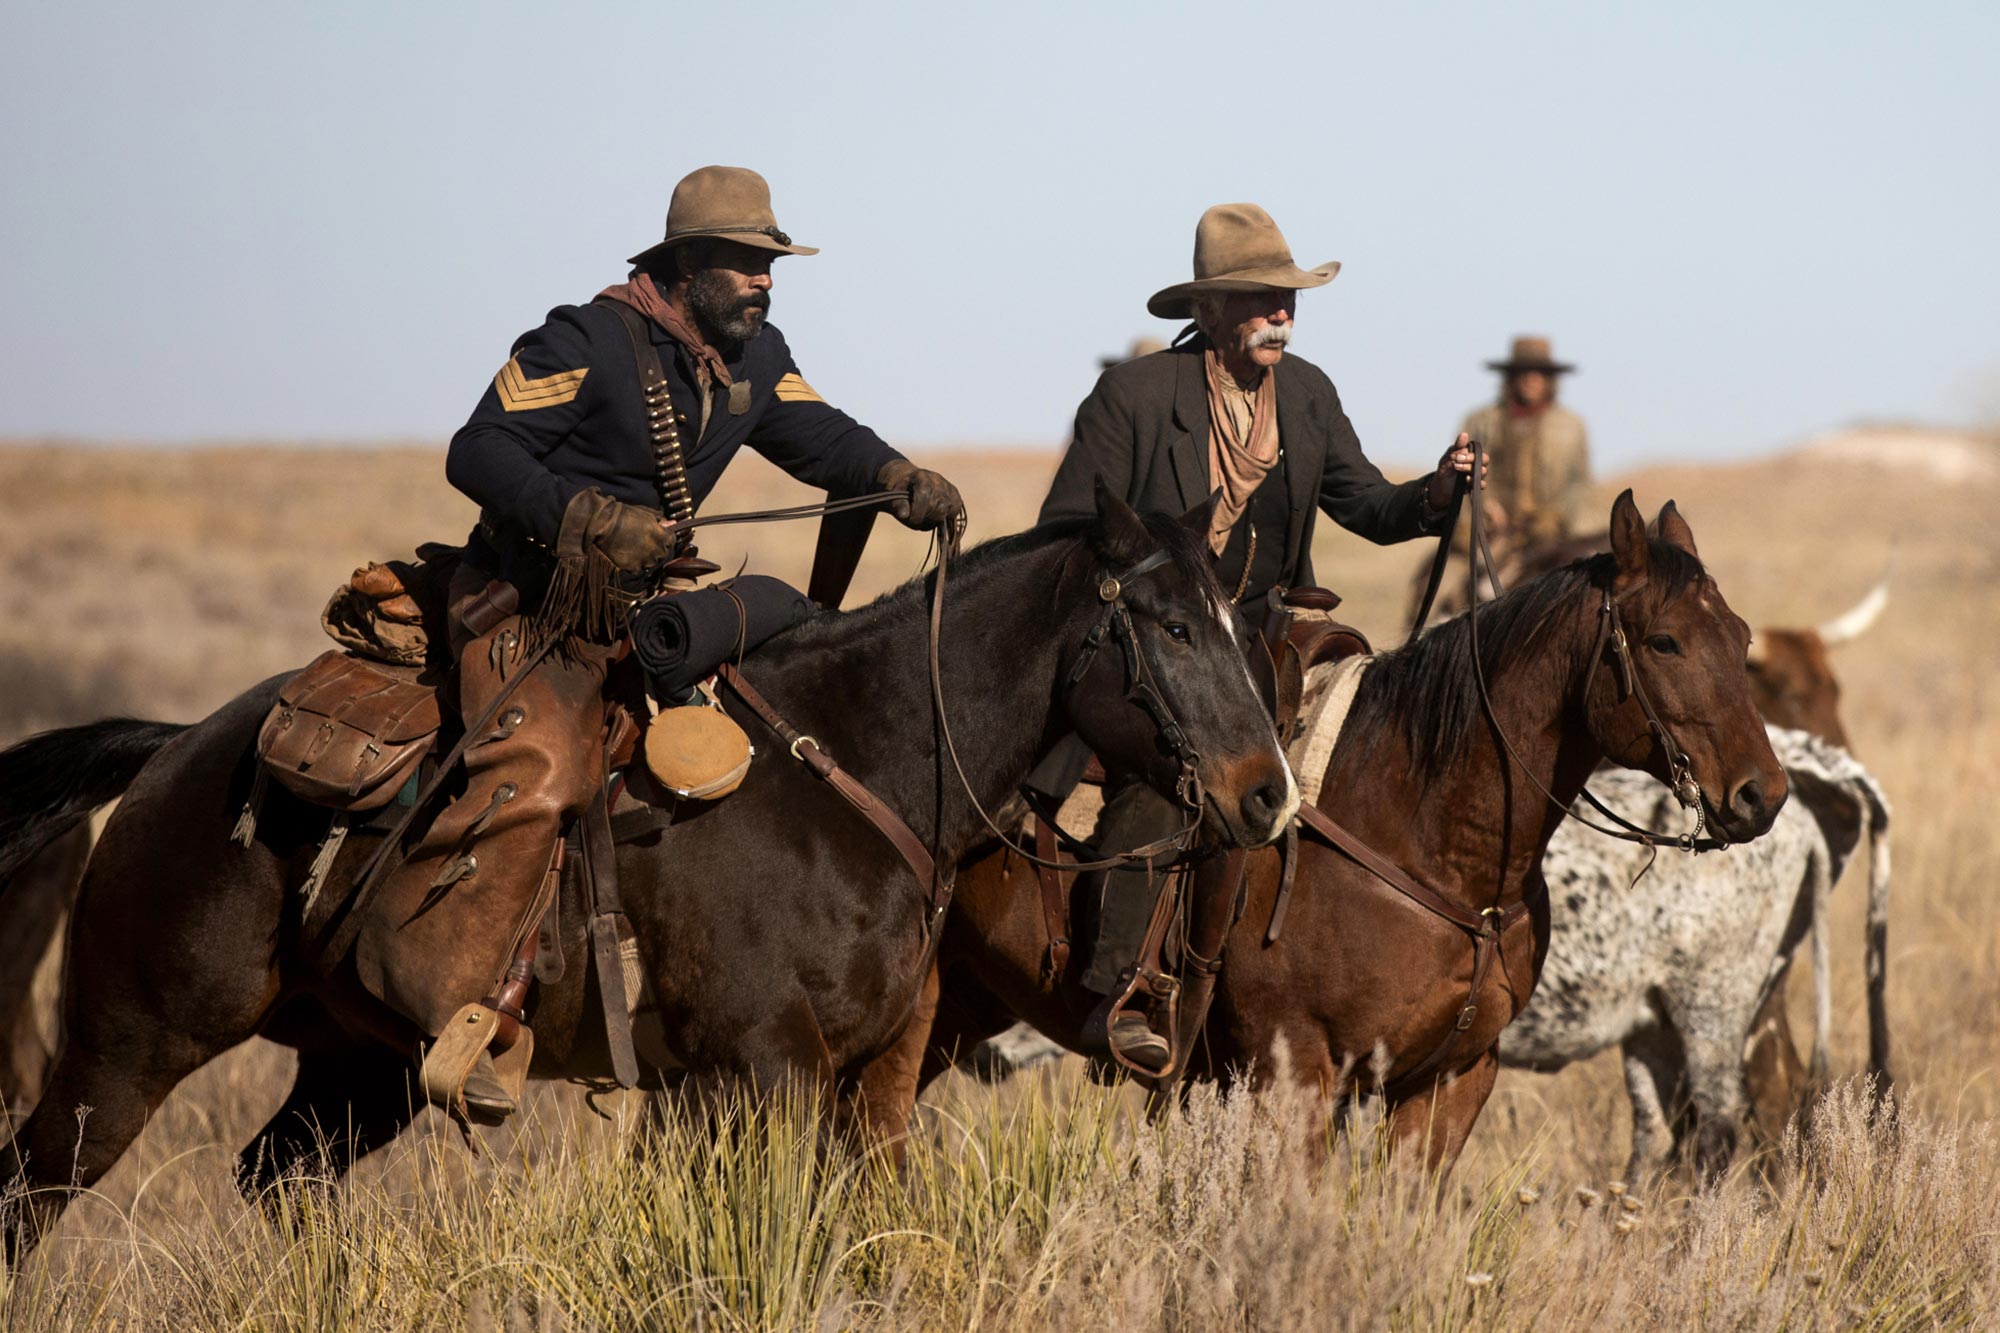 1883 spin-off will focus on legendary Black lawman Bass Reeves, inspiration behind the Lone